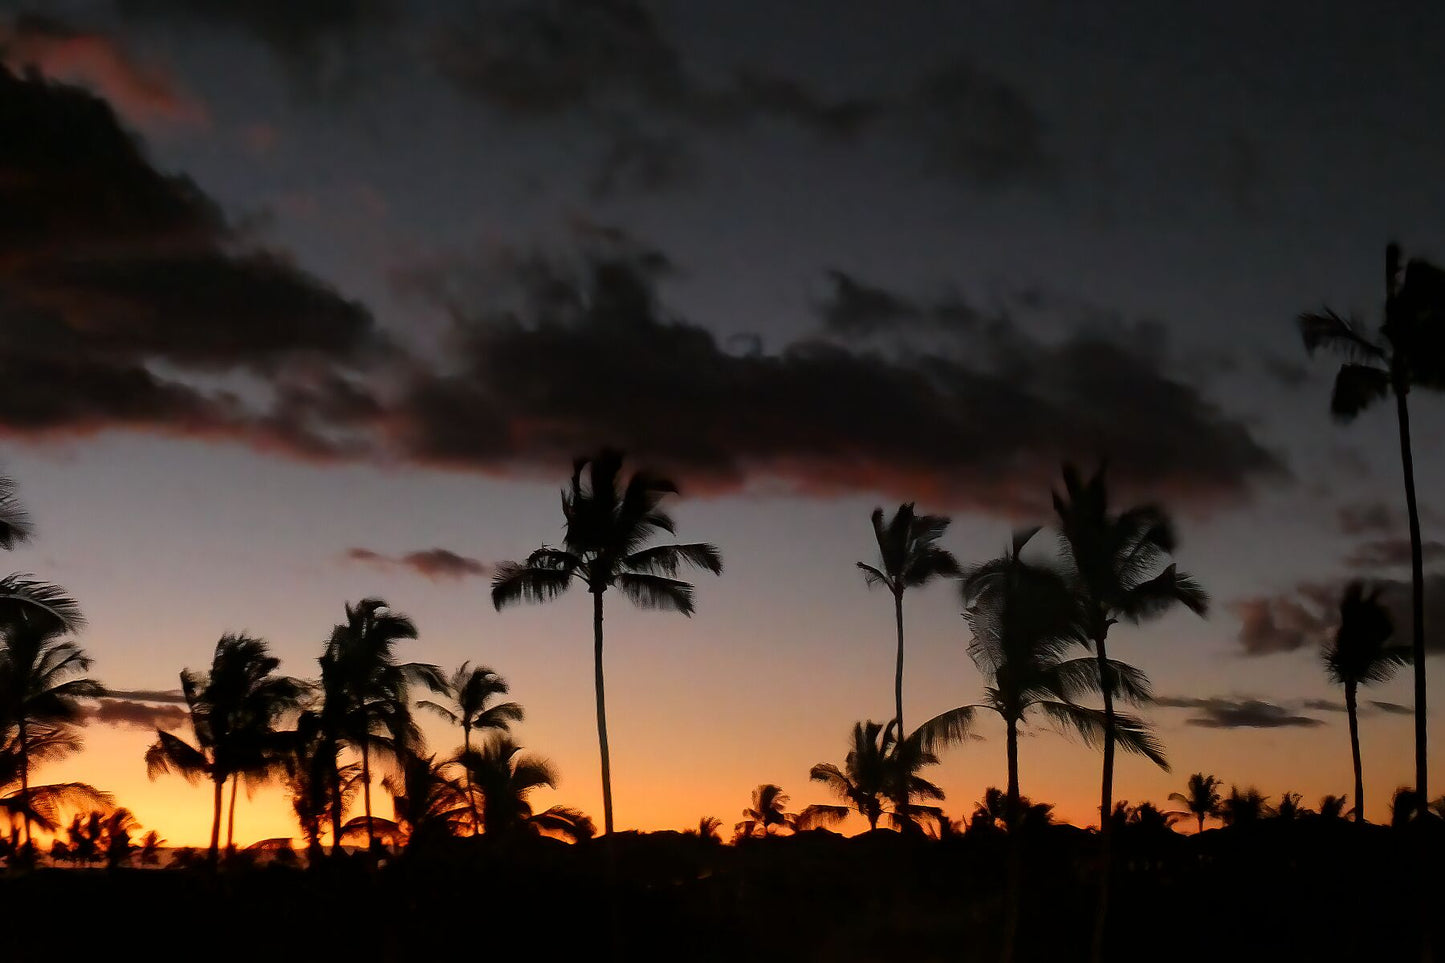 Sunset in Hawaii IV